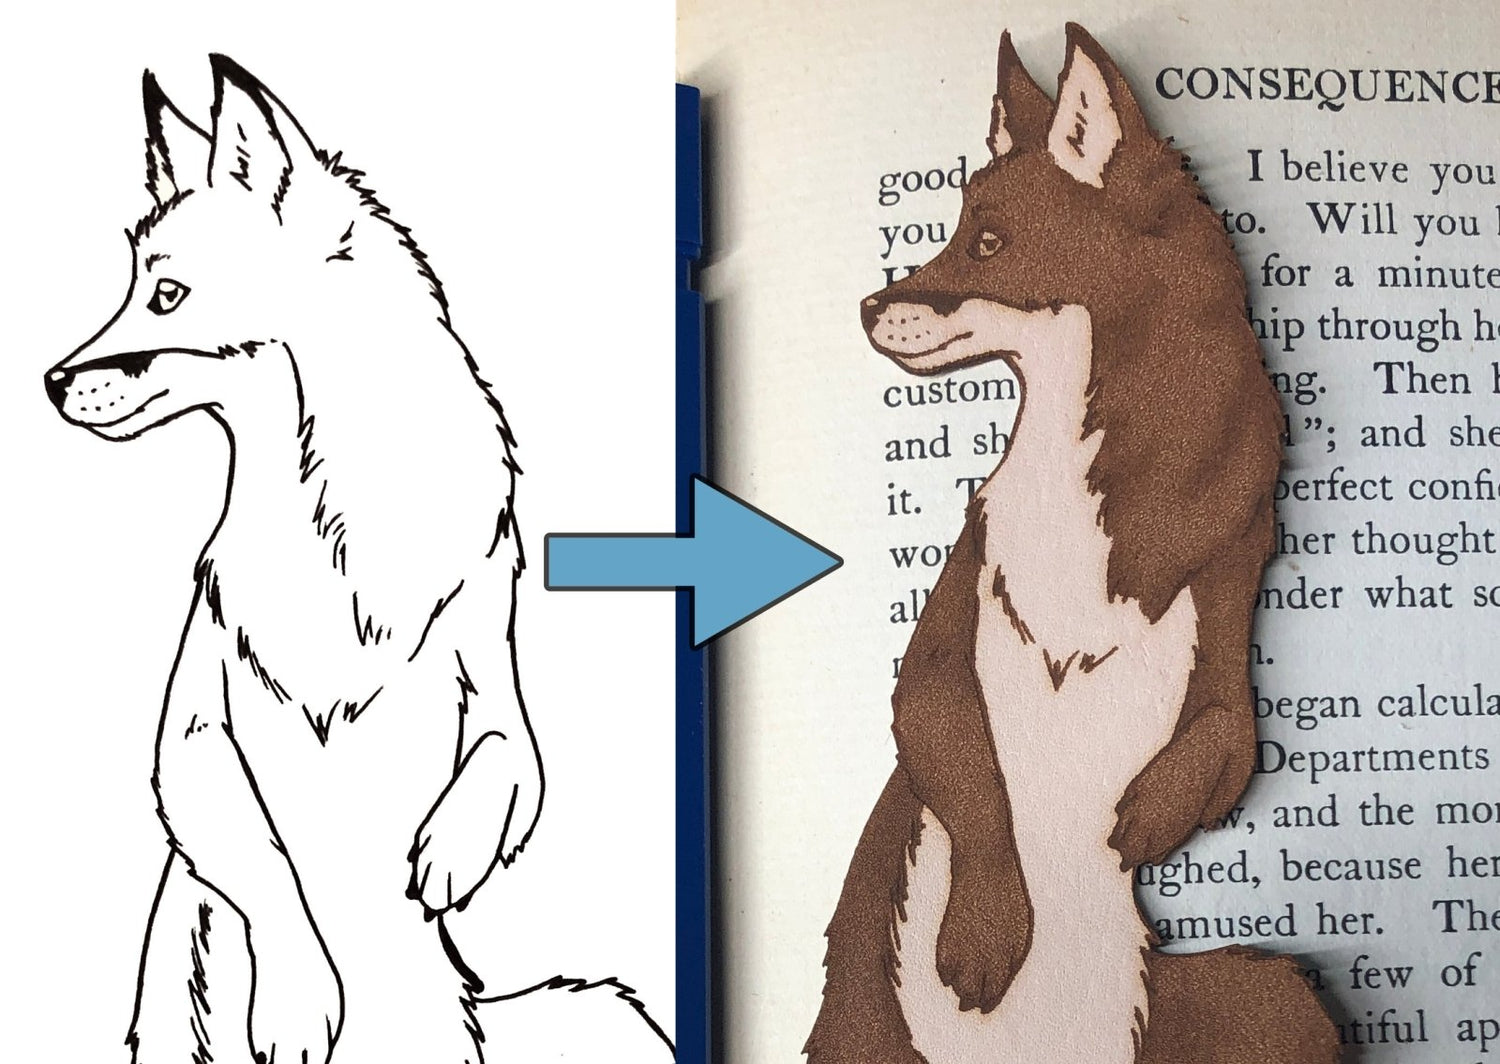 This is what it looks like when the line art is adapted into a bookmark.